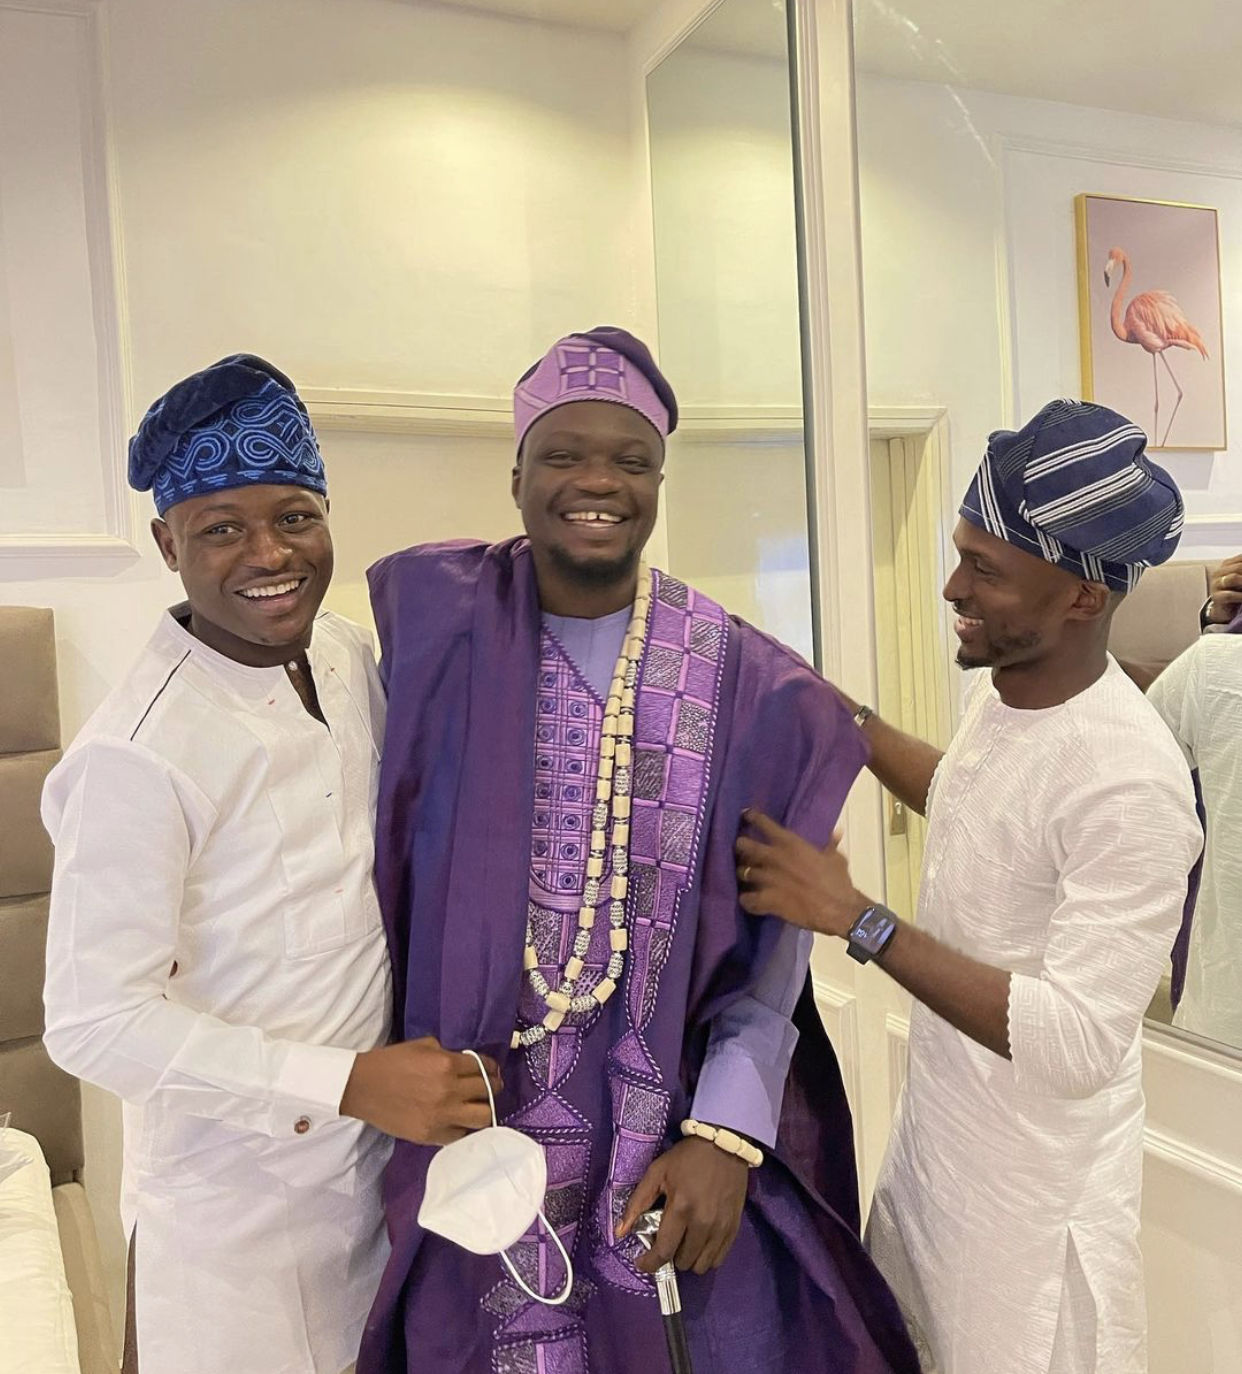 Asiri Comedy: The groom and his friends